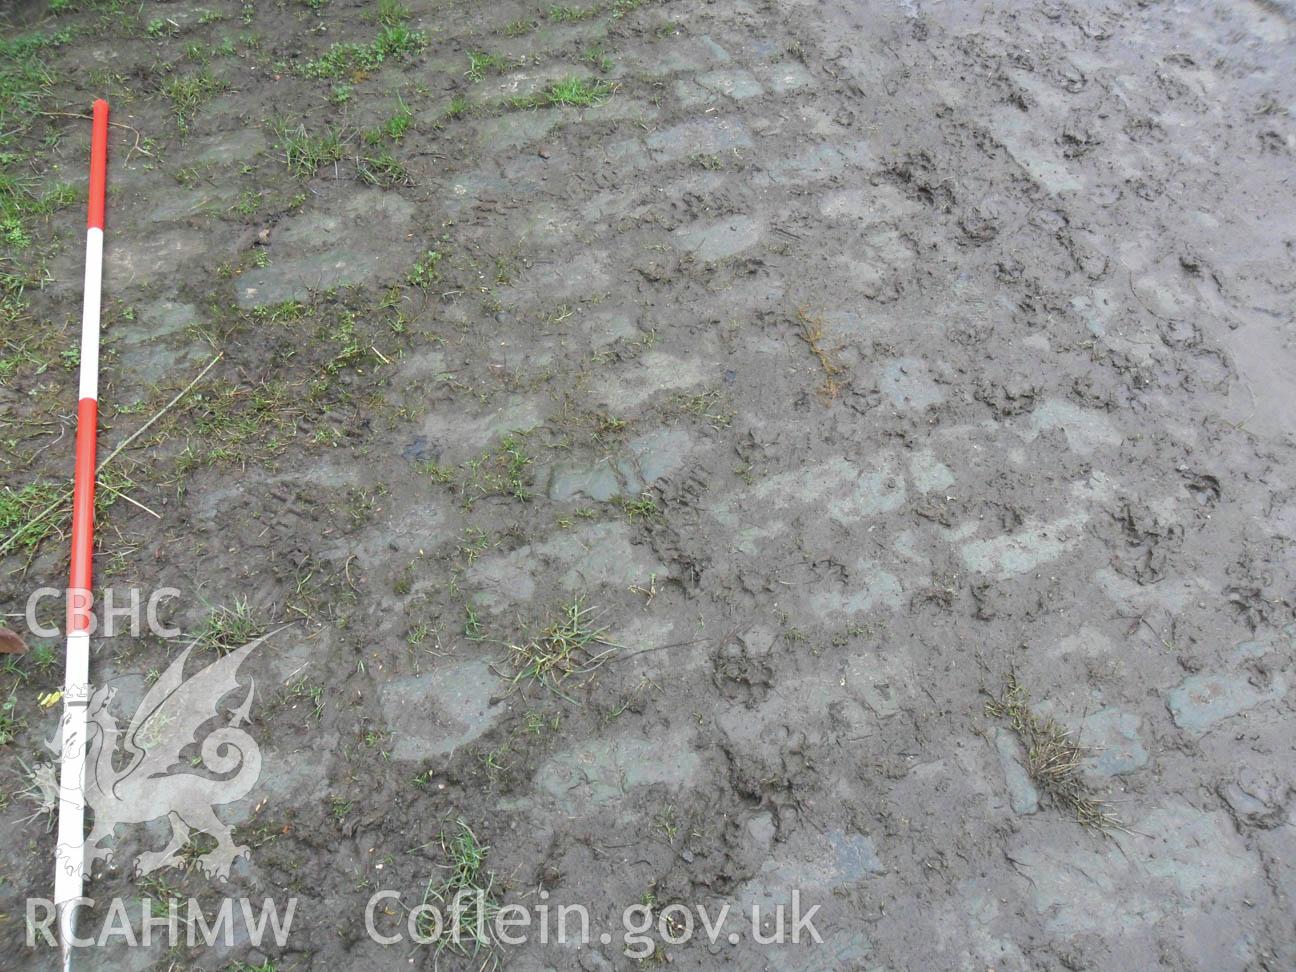 'View of rectangular cut regular cobbles within courtyard, Scales 1x2m.' Photographed as part of archaeological desk based assessment and building recording undertaken by Archaeology Wales in March 2013. Report no. 1108.